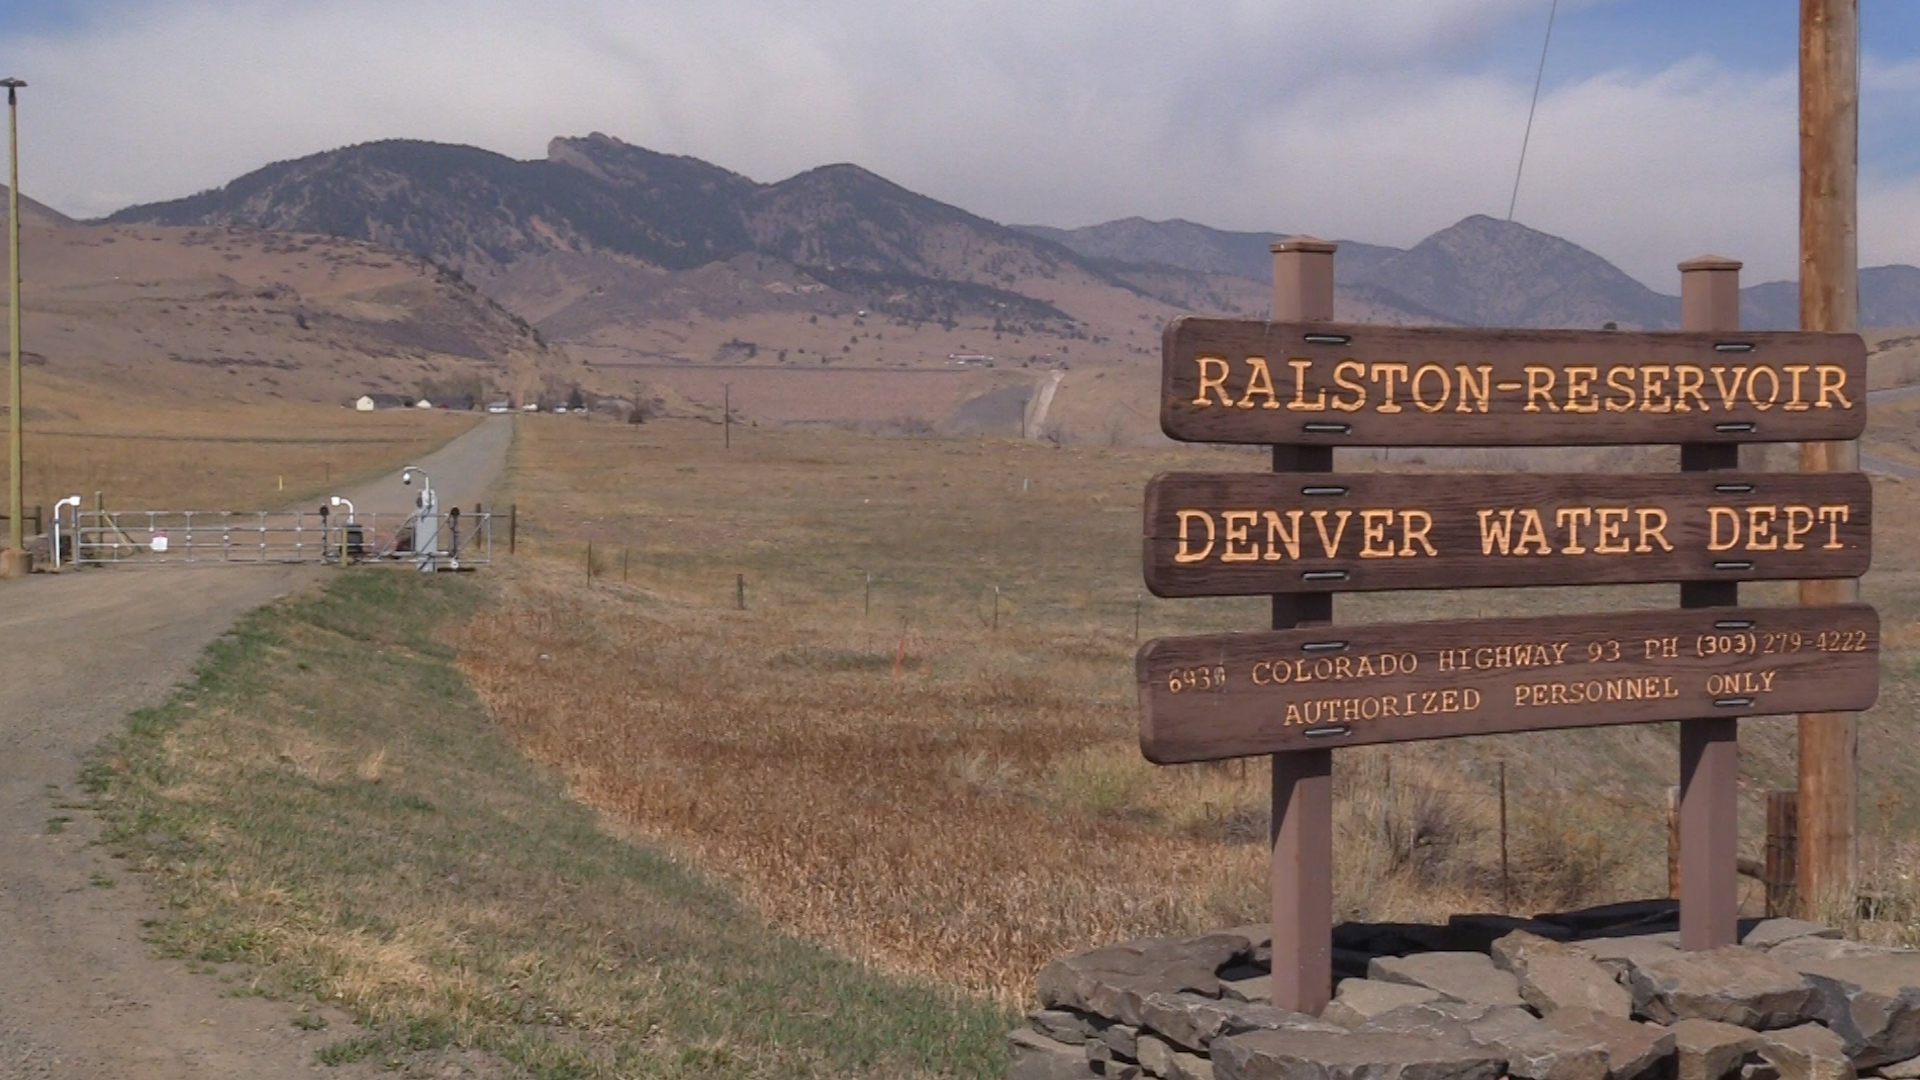 Denver Water is preparing to build a state-of-the-art treatment plant next to Ralston Reservoir in Jefferson County.